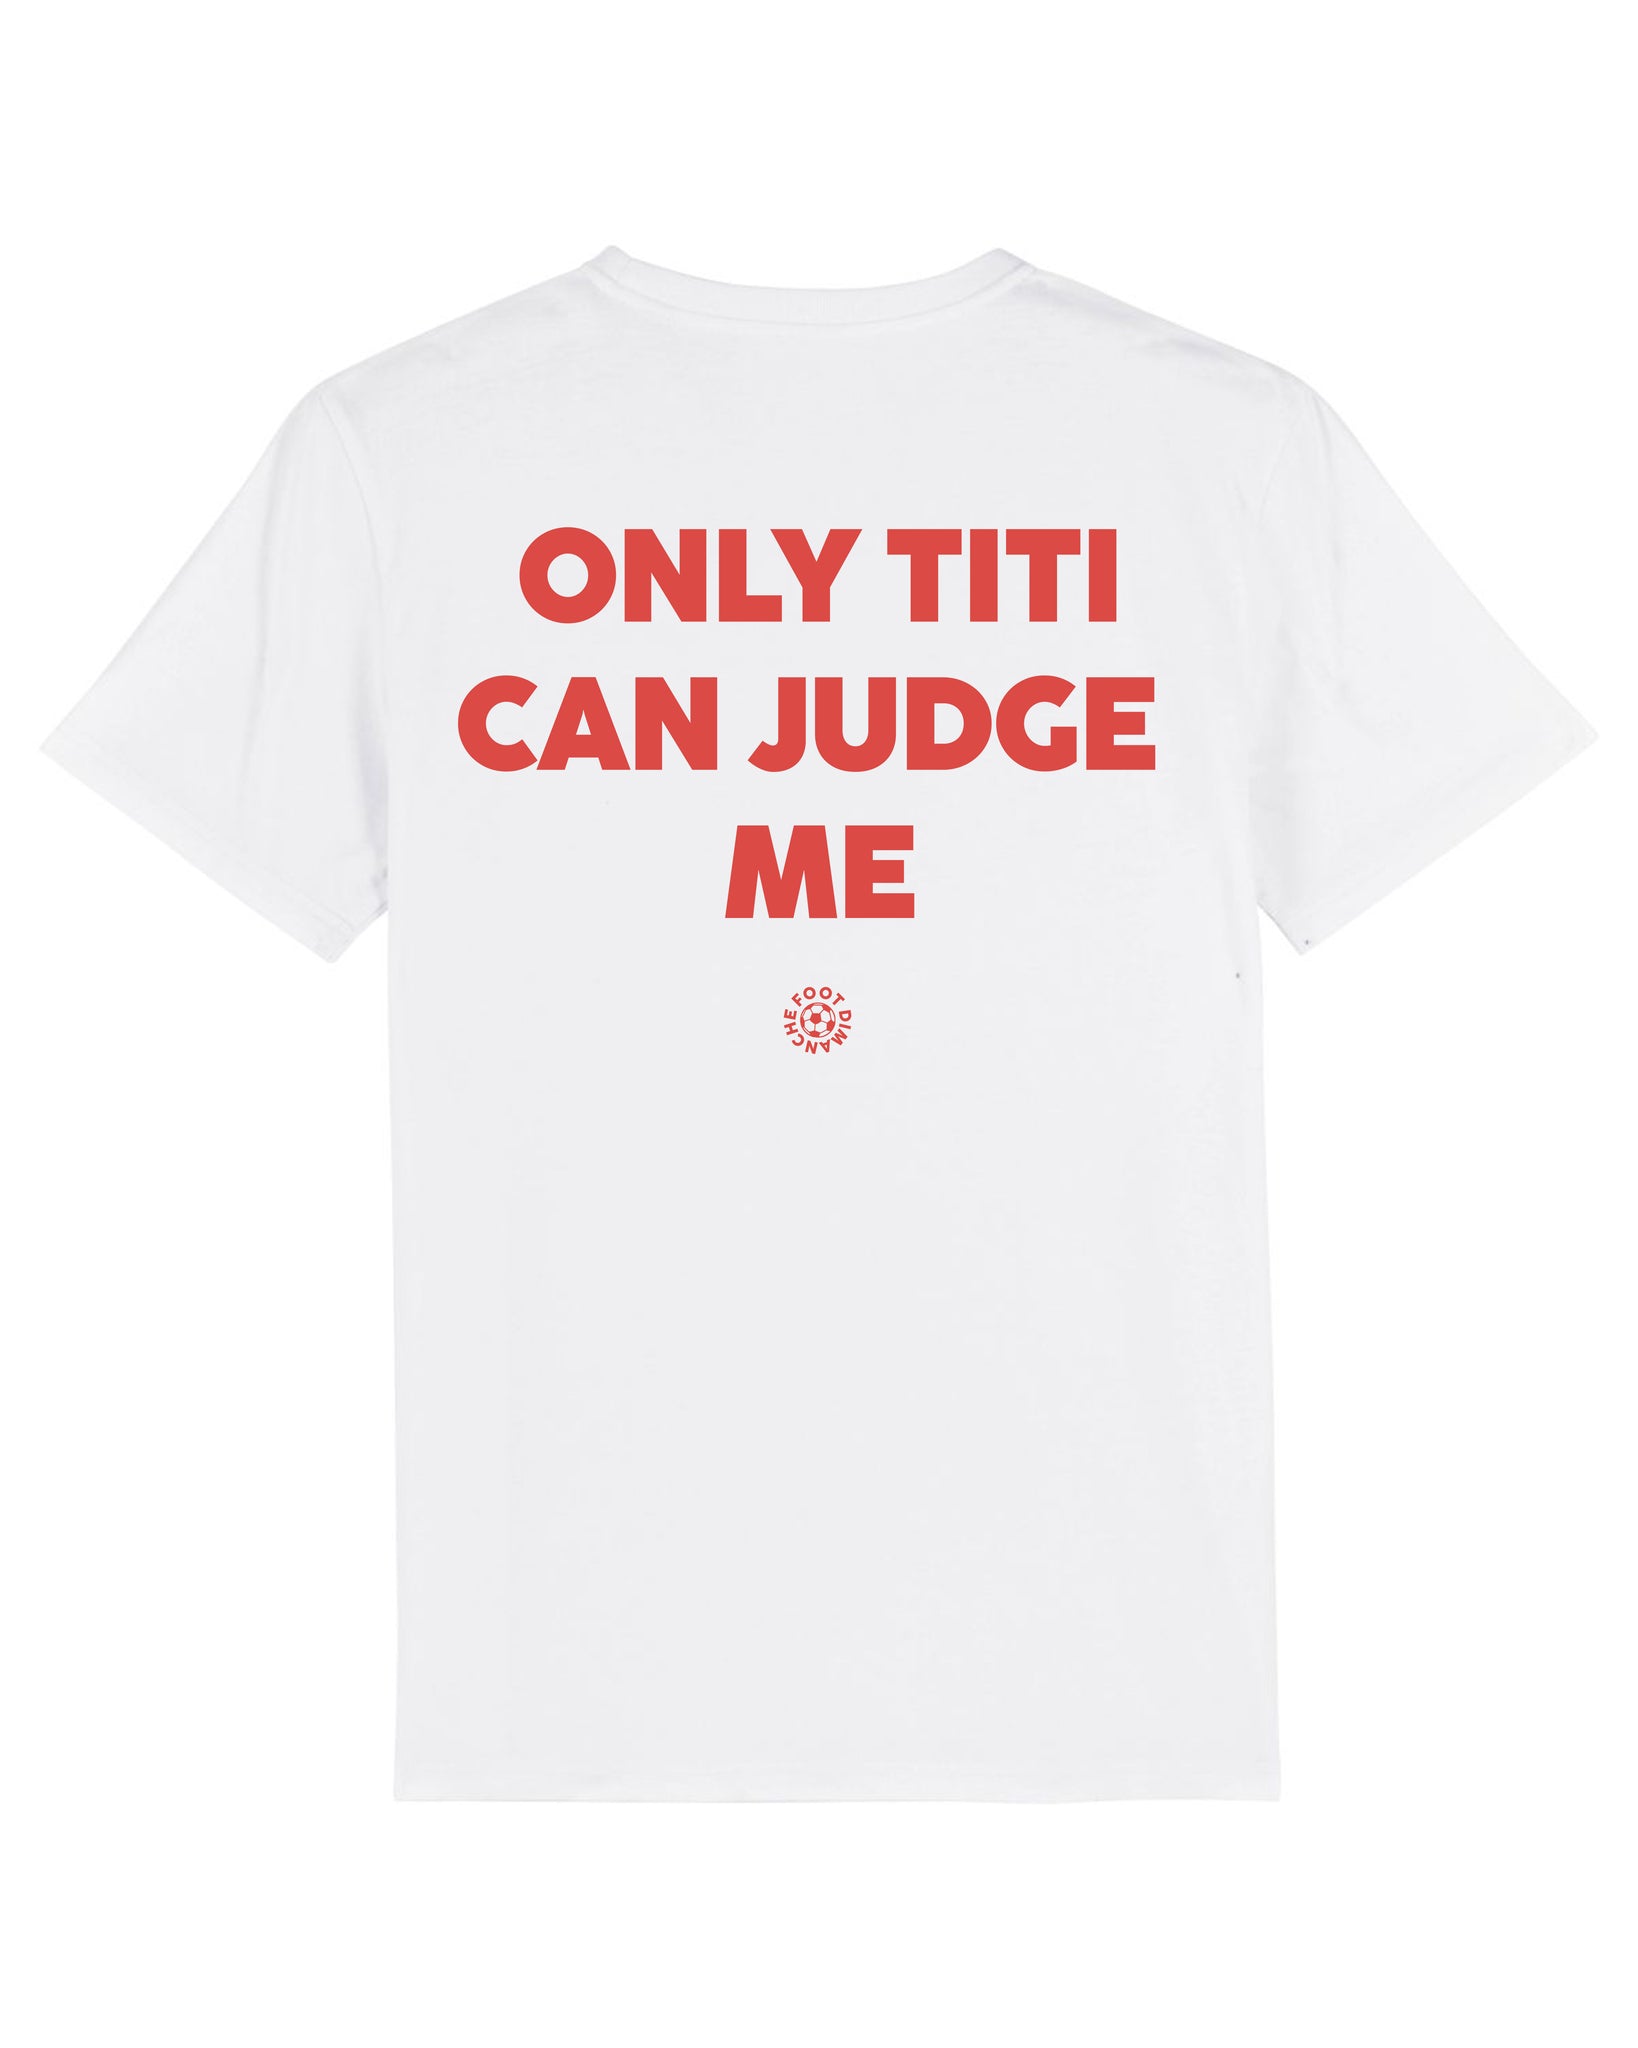 Tee Shirt Only Titi can judge me